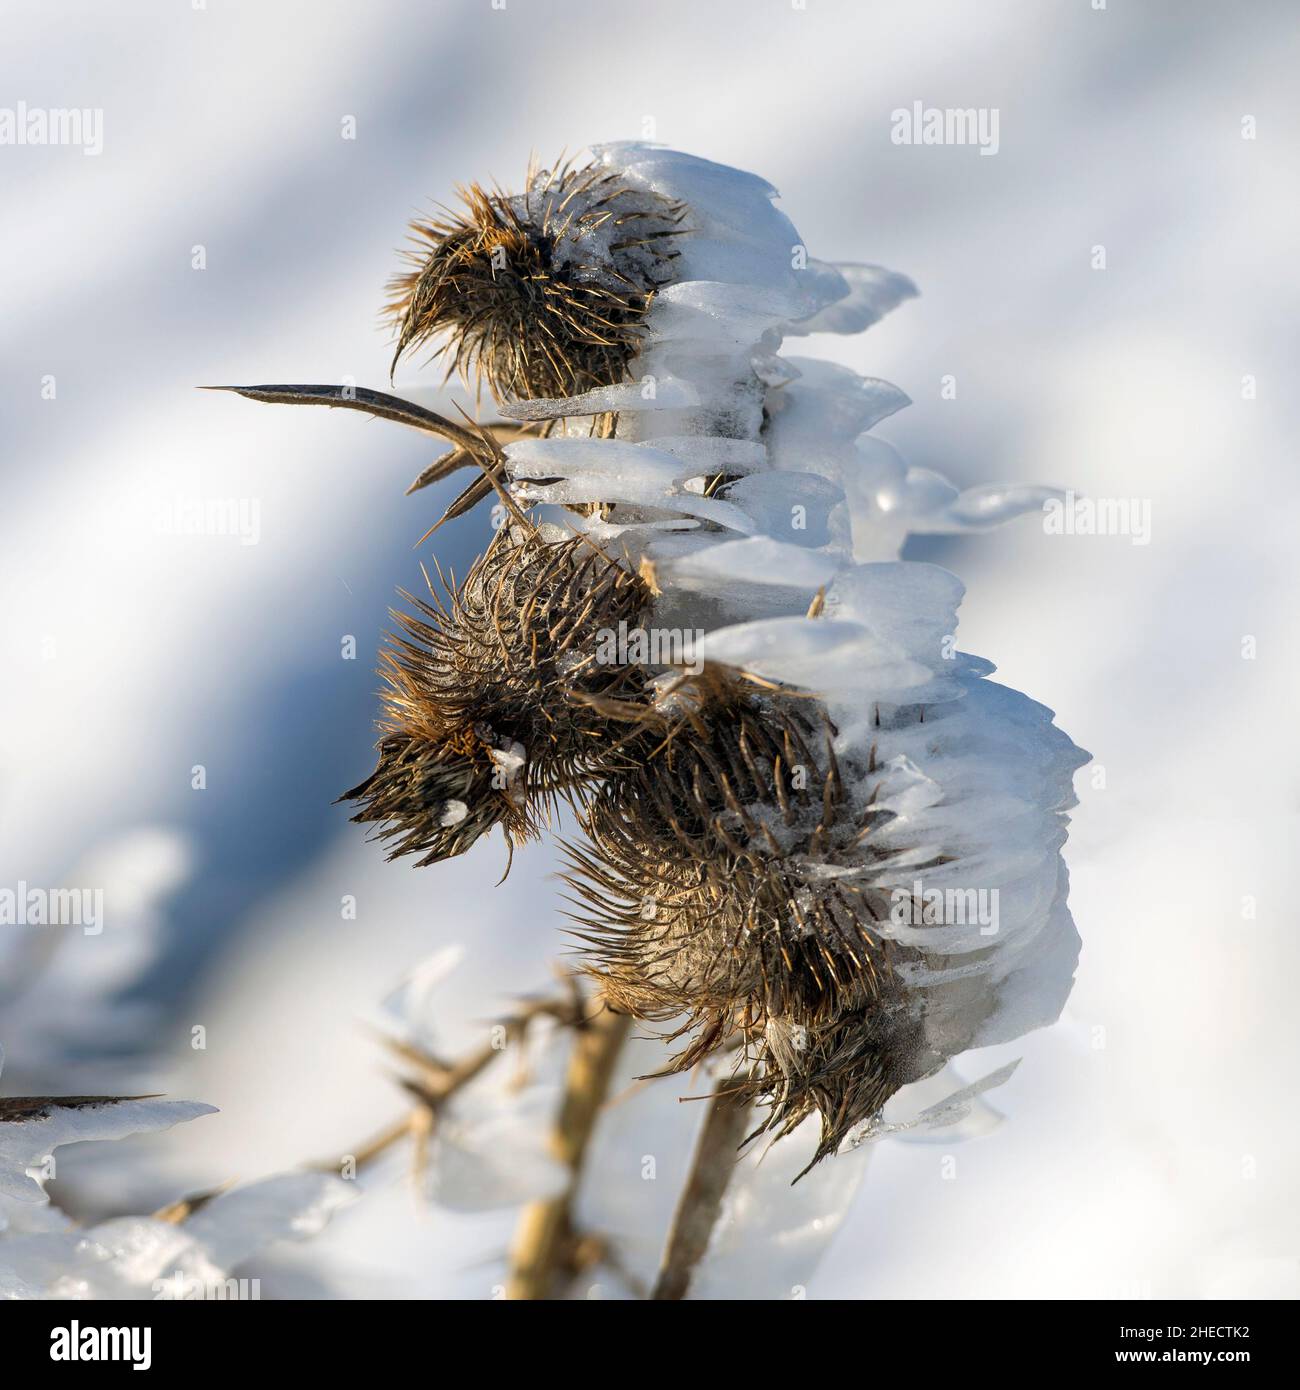 France, Nature sometimes adopts very curious forms called Pareidolie, a thistle flower covered with snow evokes a bumblebee on the Semnoz plateau Stock Photo